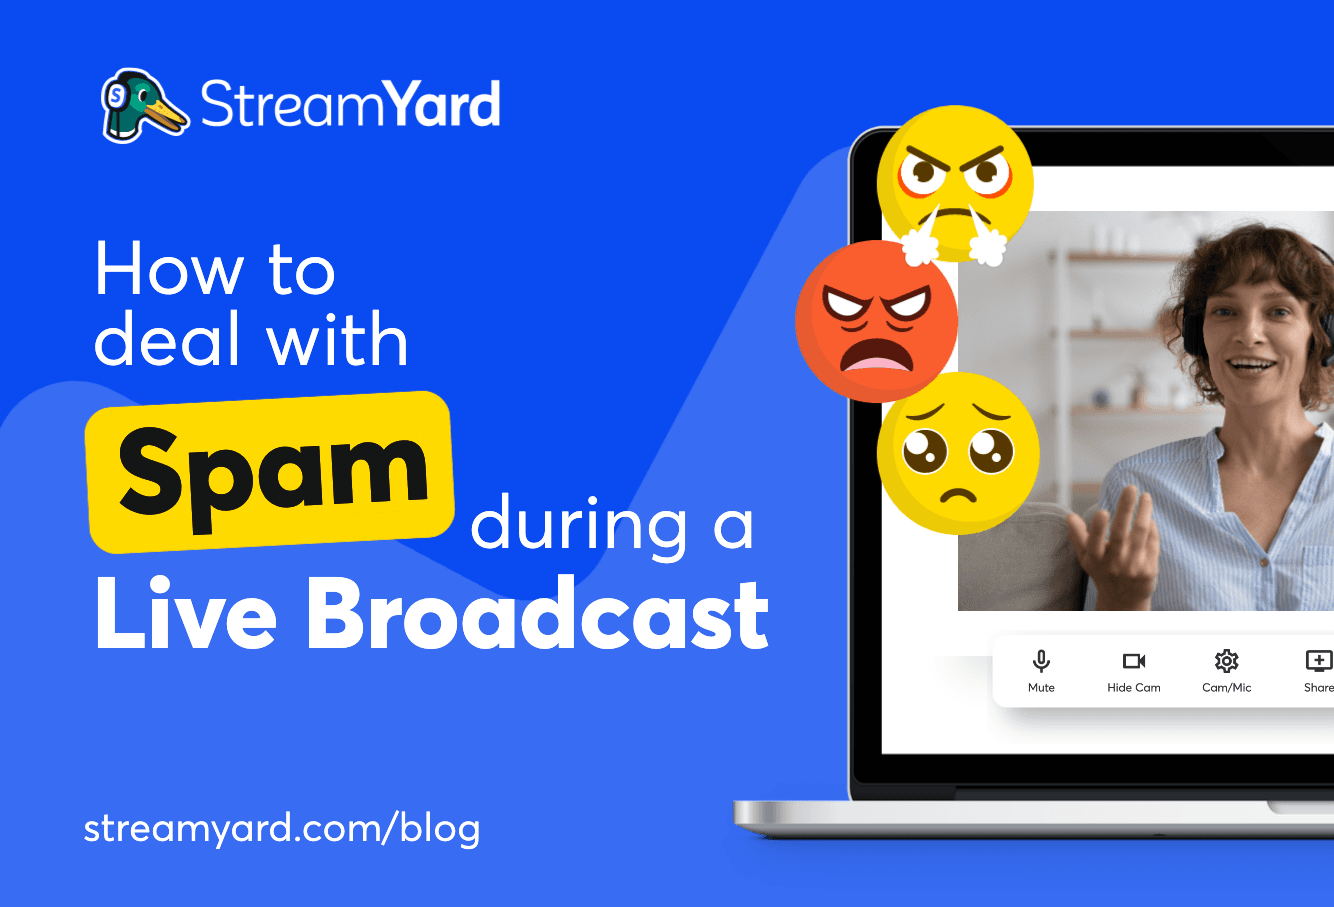 Find out the basics of dealing with spam when streaming and learn how to deal with spam during your live broadcasts with these five simple ways.